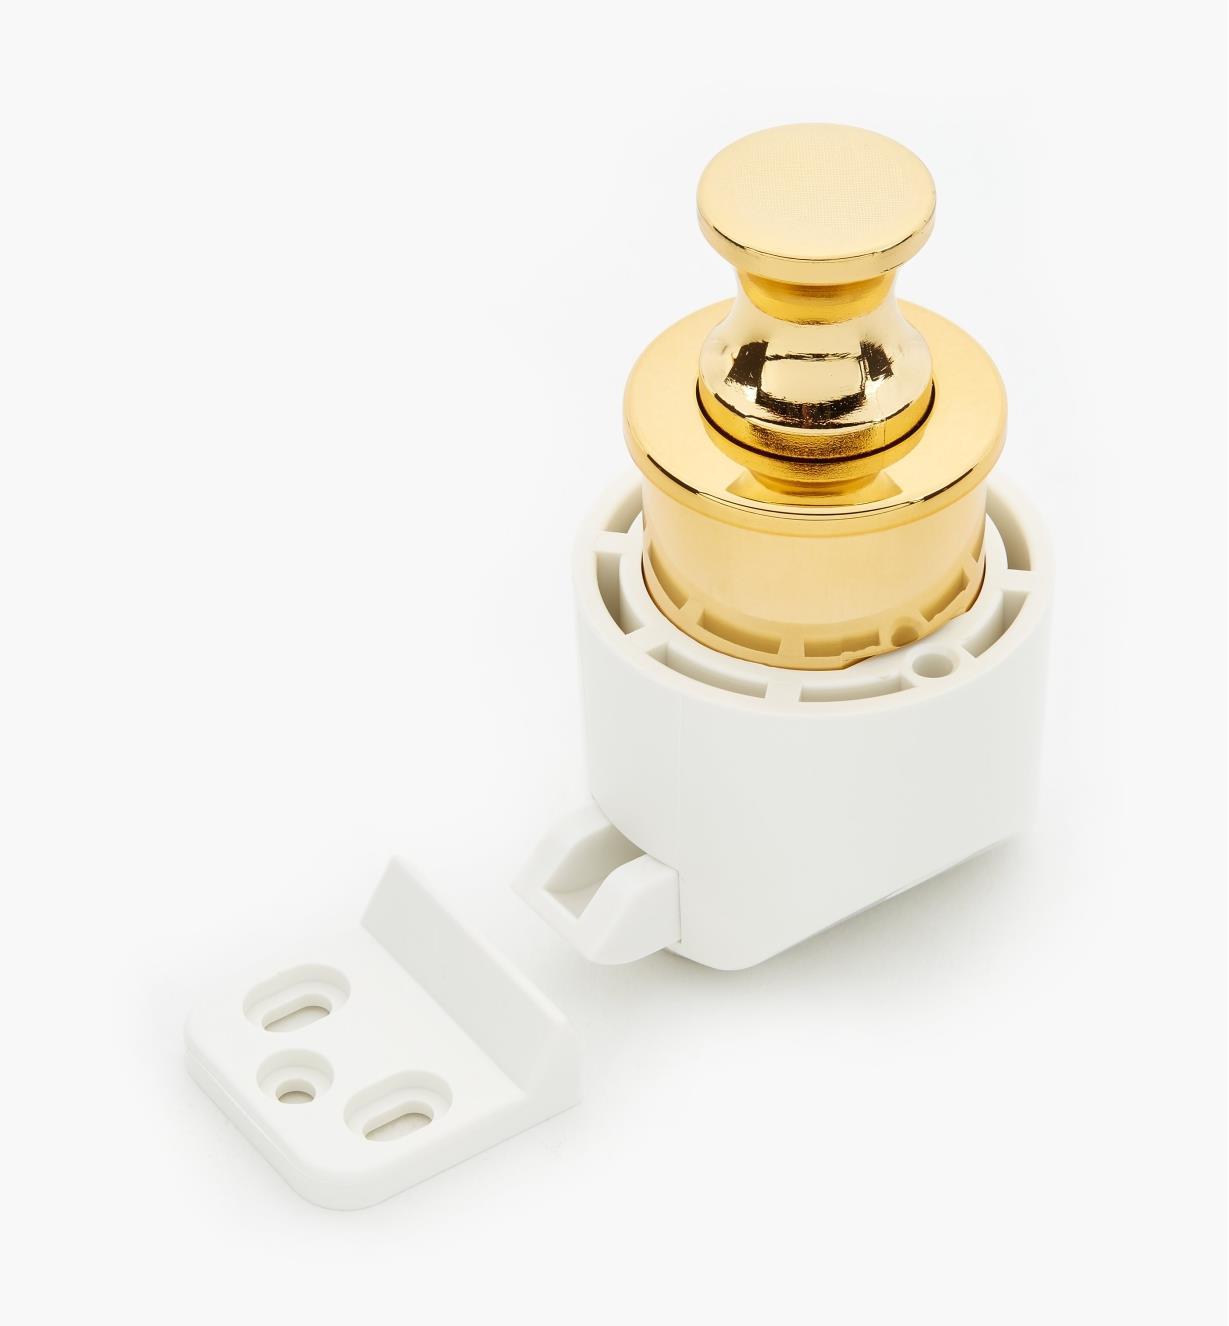 00S3111 - Gold-Plated Knob/White Latch